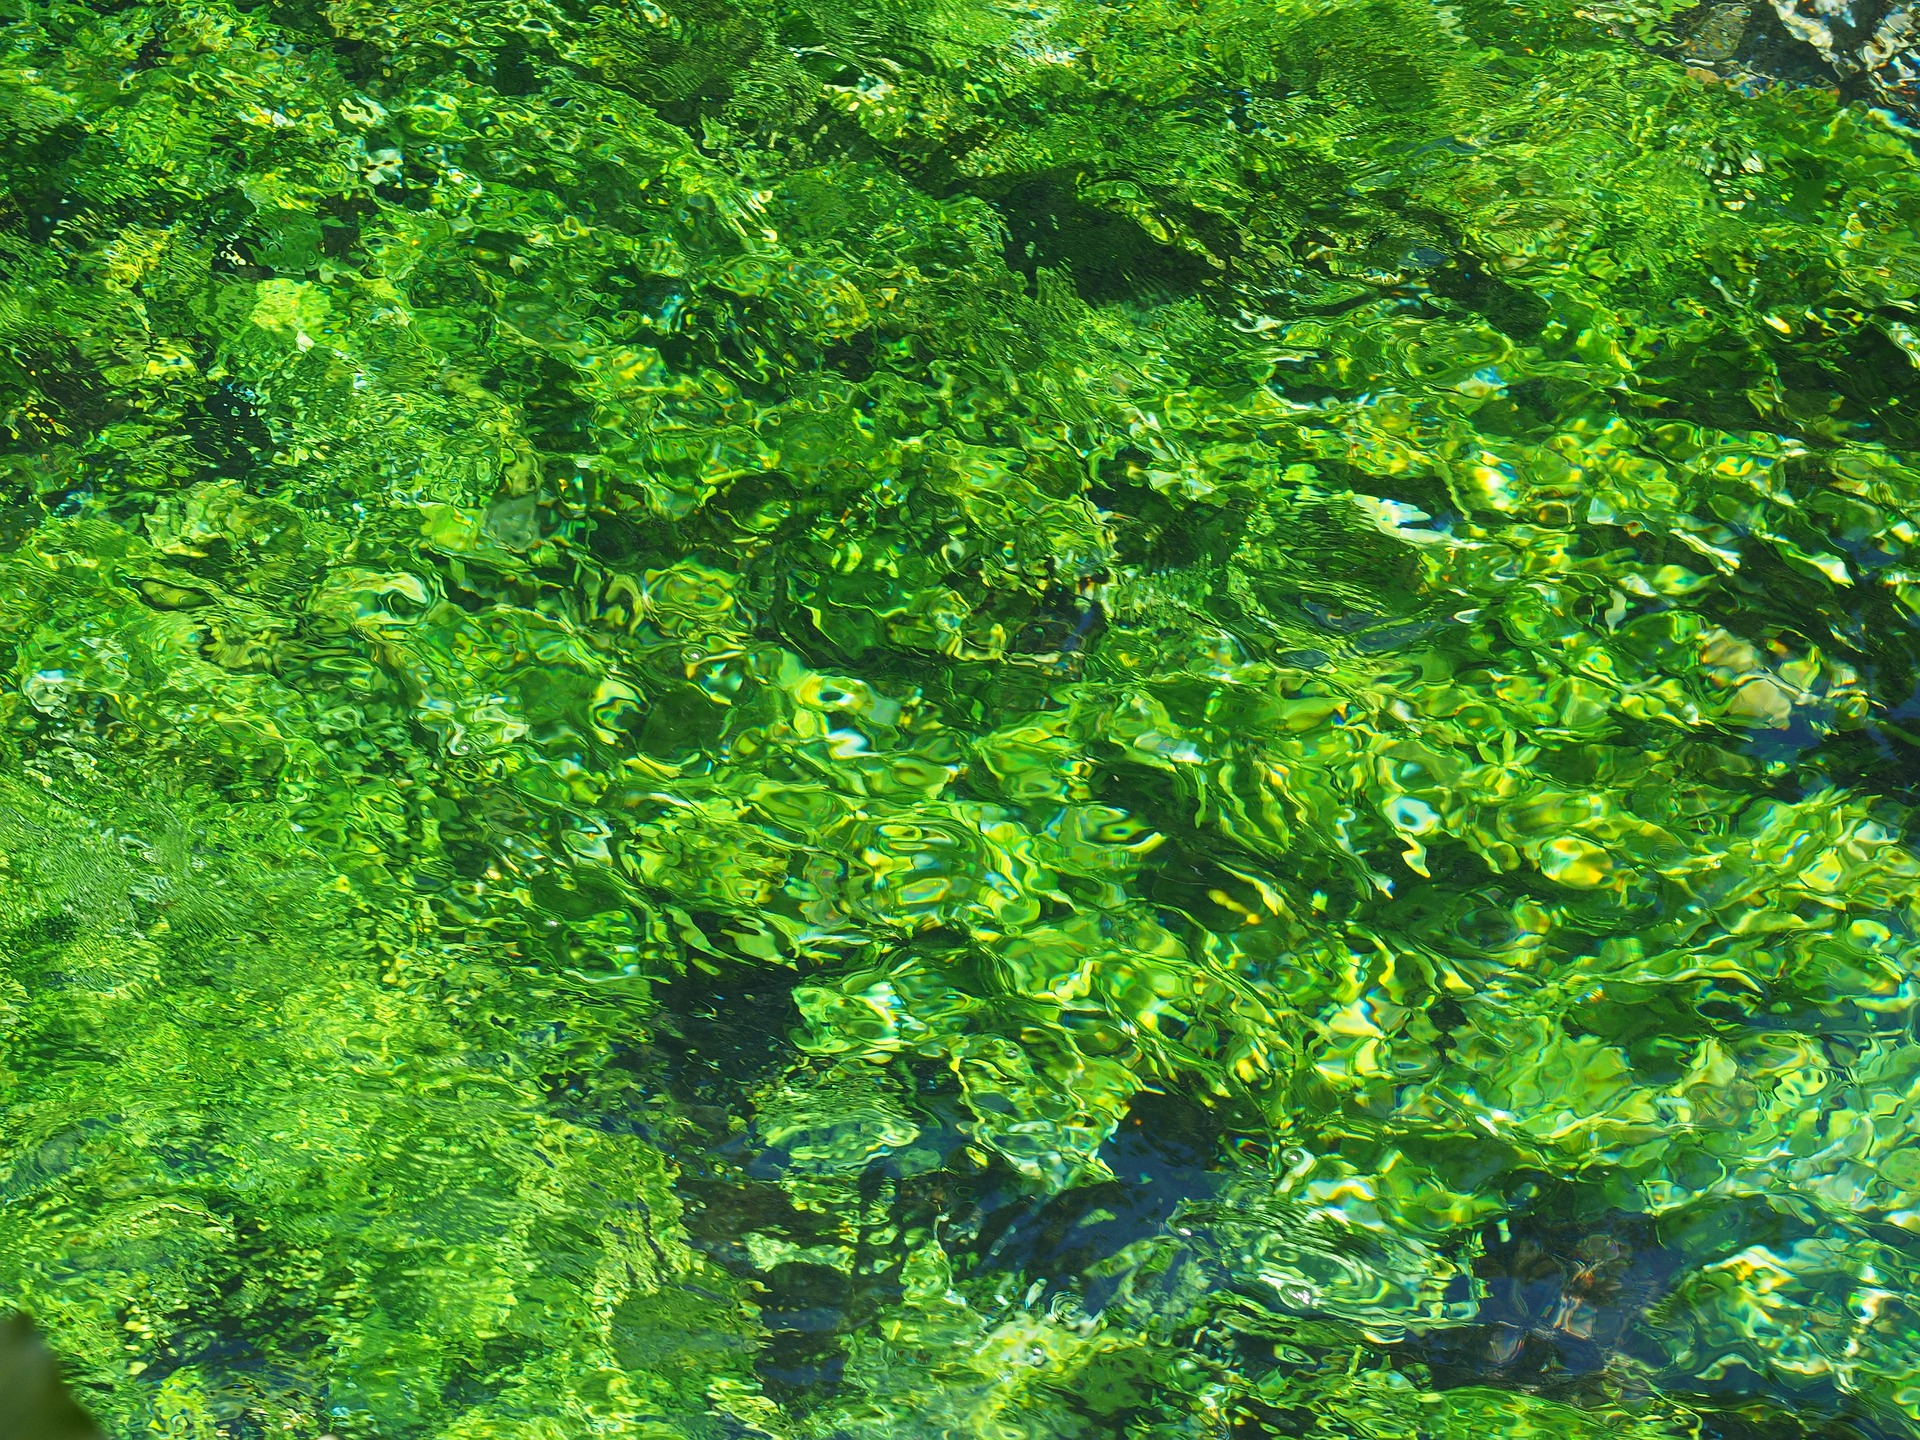 Aquatic plants in moving water